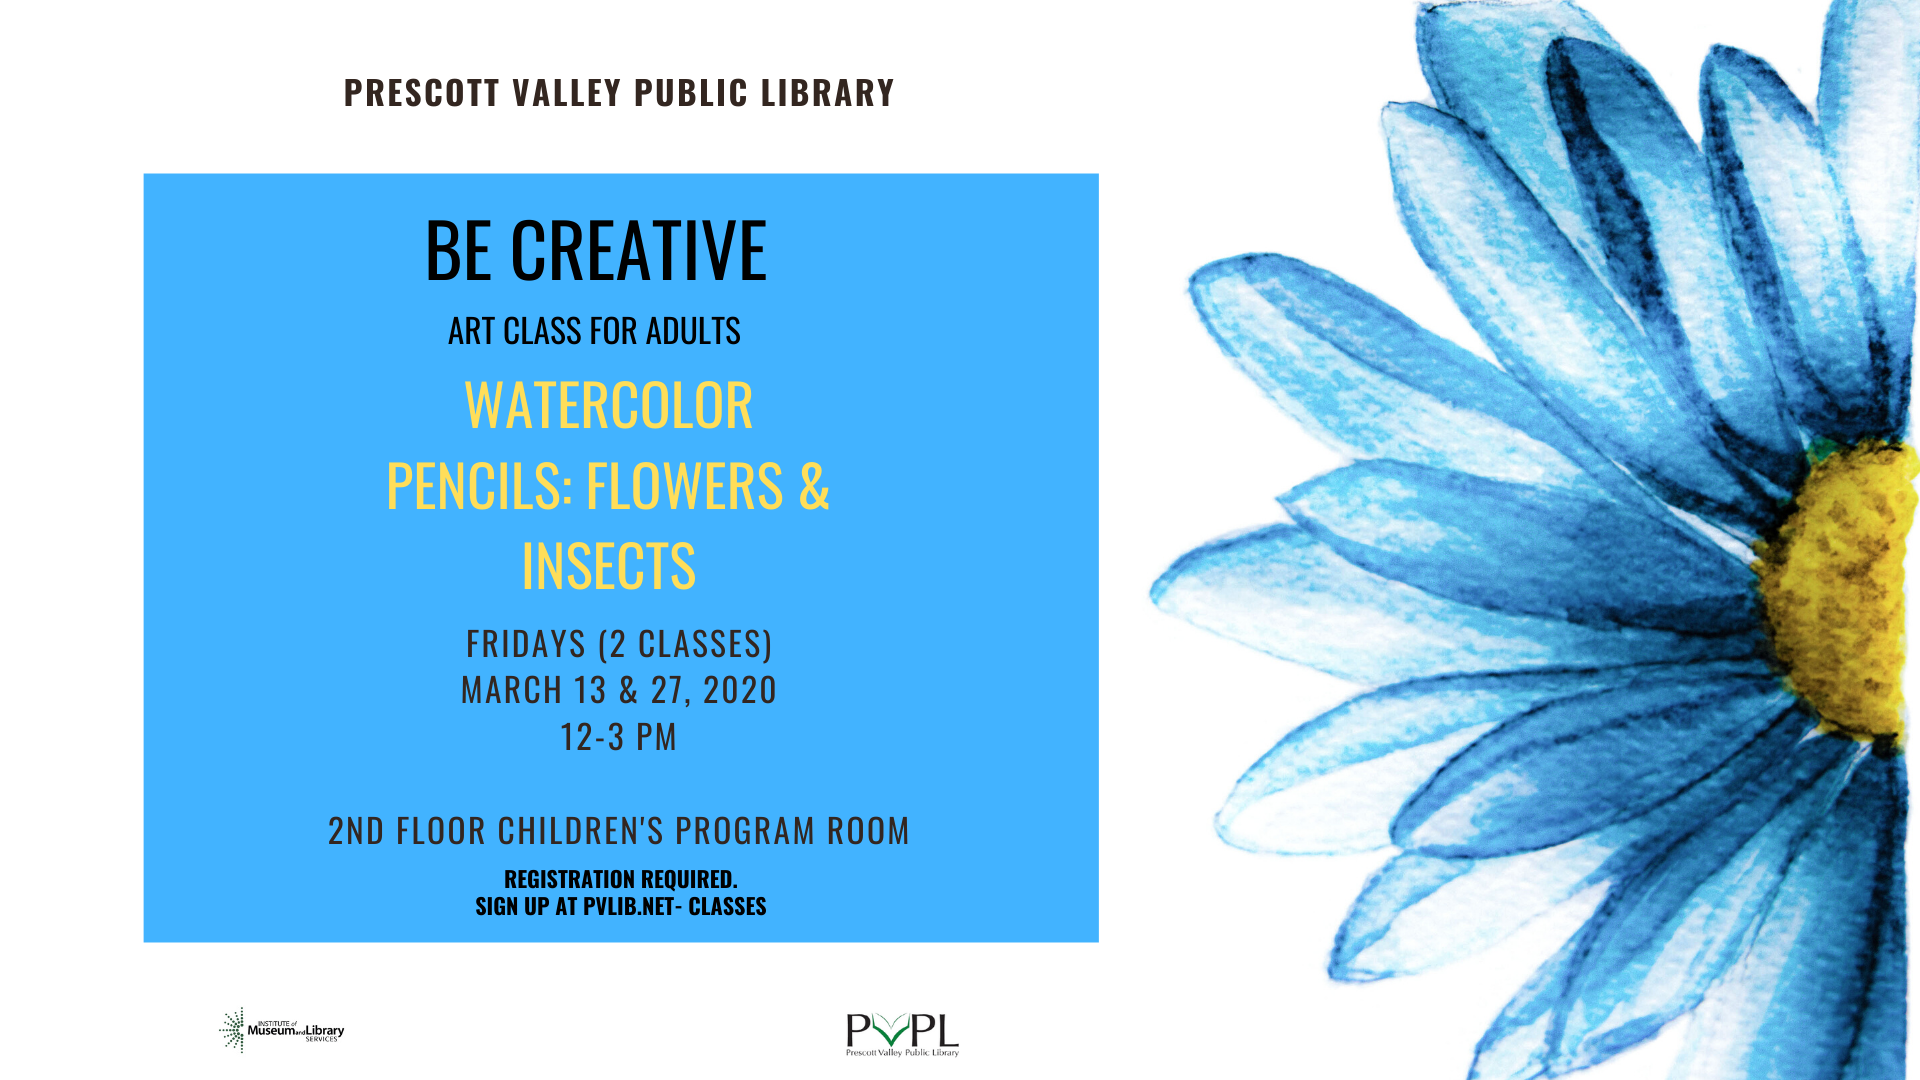 March Class Watercolor Pencils: Flowers & Insects (2 week class) Registration Required